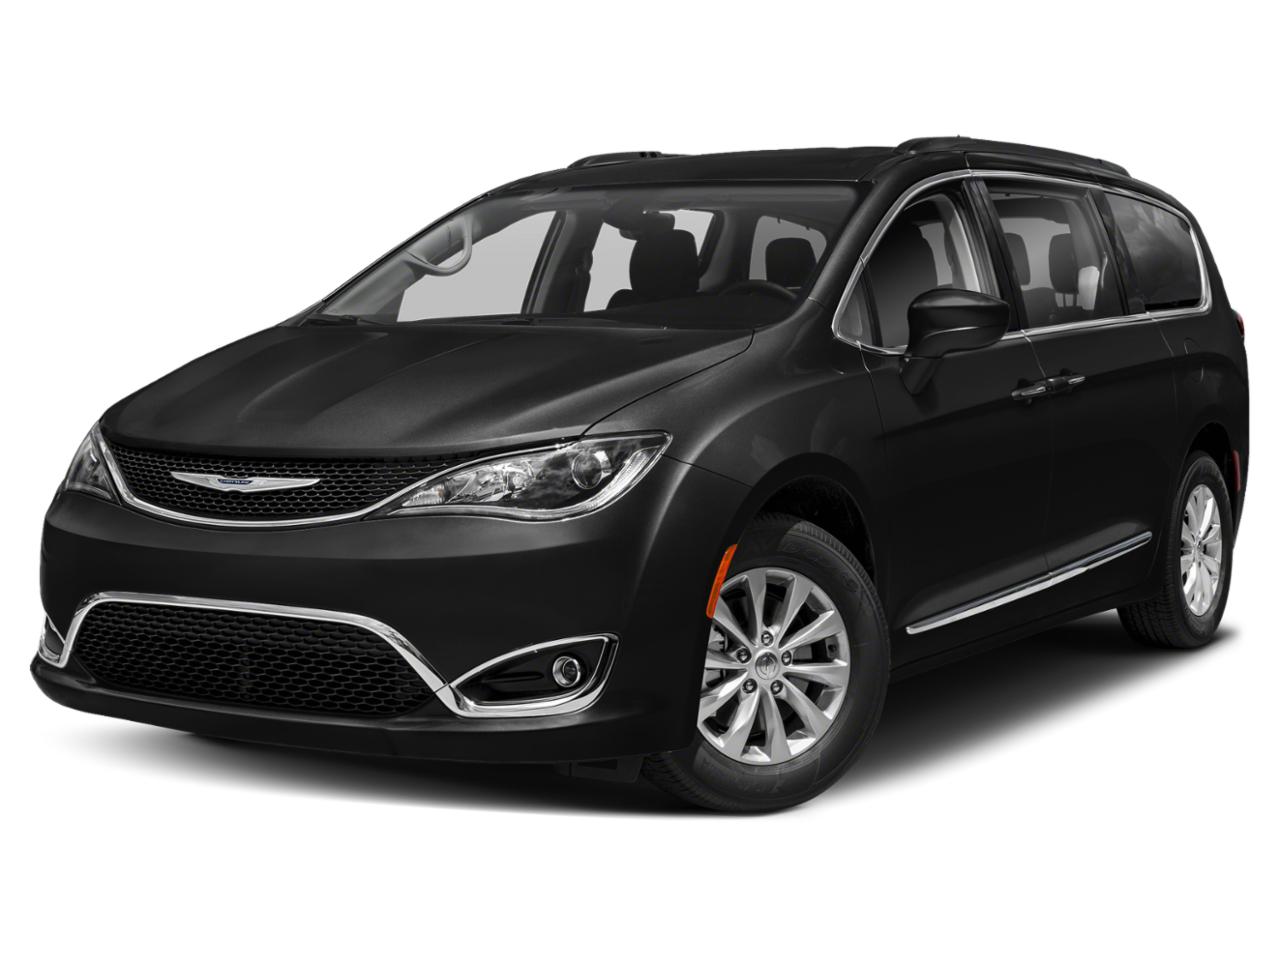 2020 Chrysler Pacifica Vehicle Photo in Plainfield, IL 60586